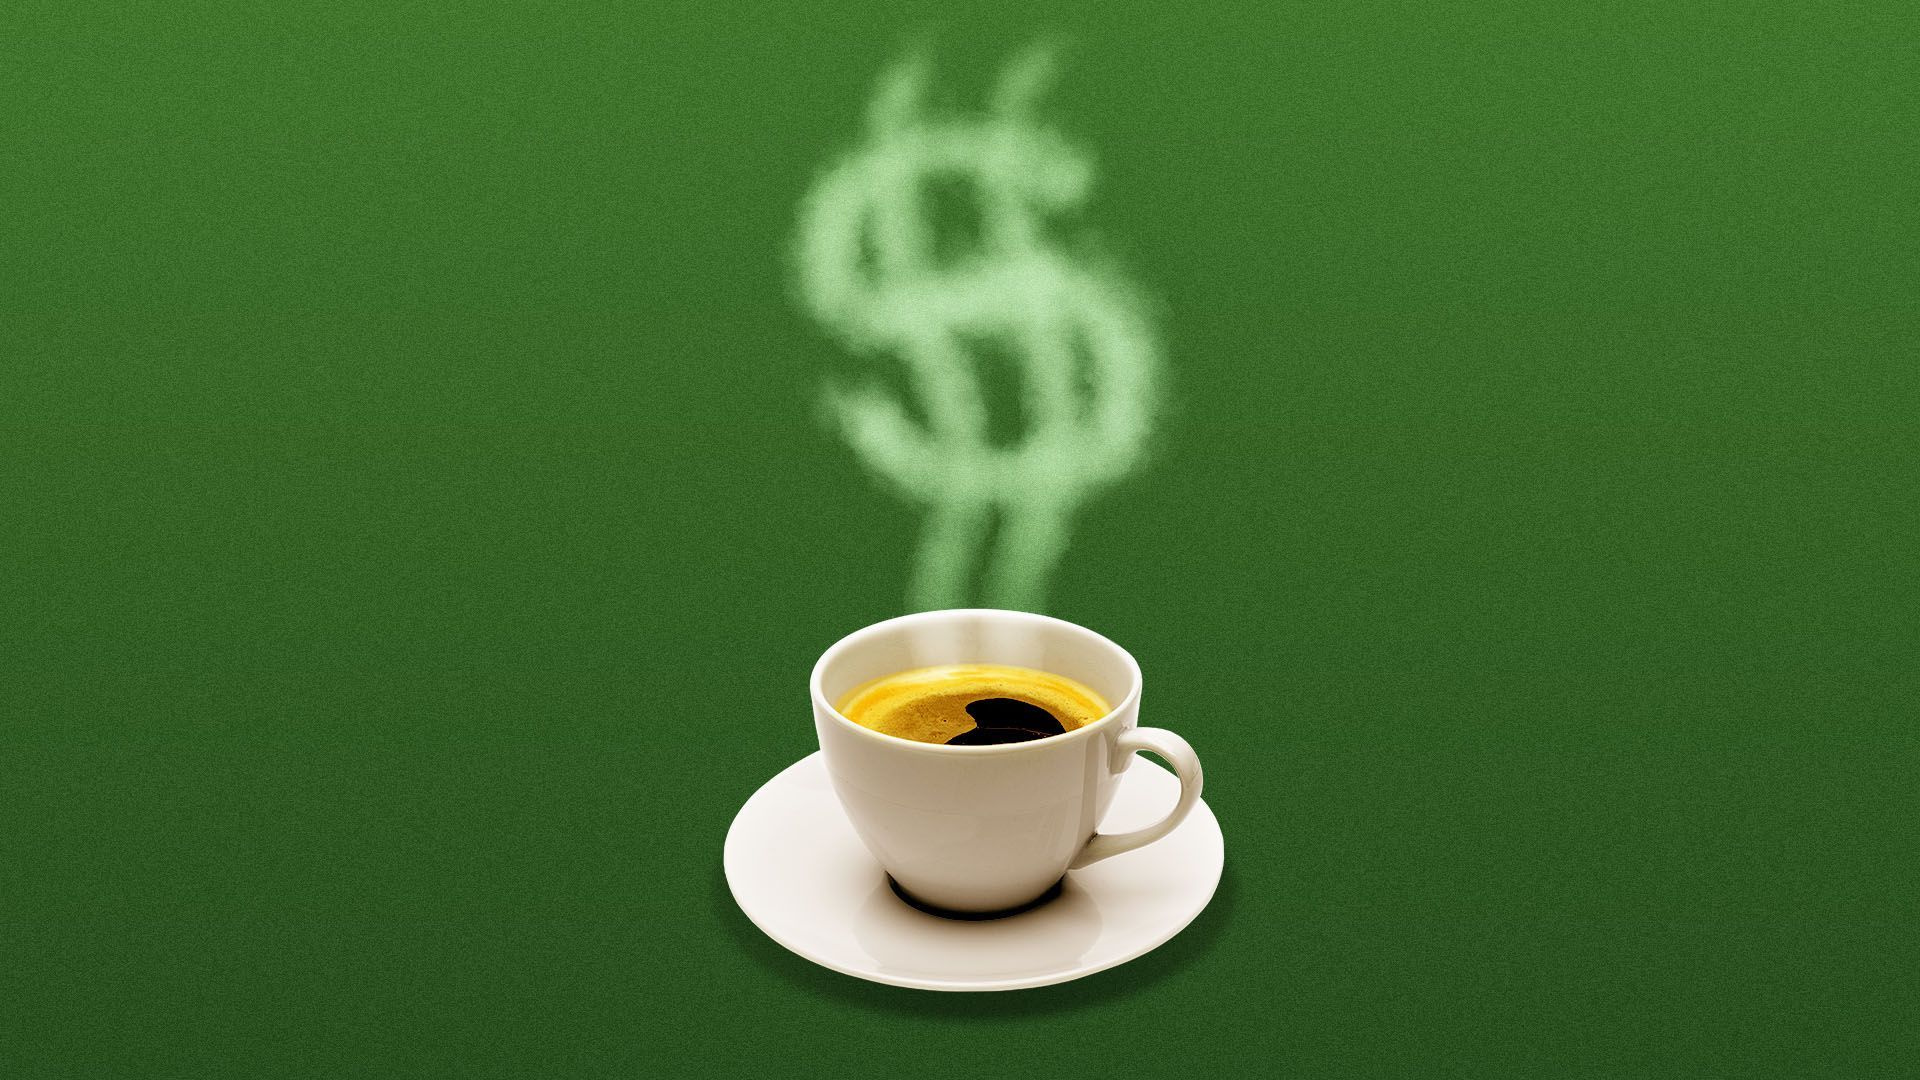 Illustration of a coffee cup with steam in the shape of a dollar sign.